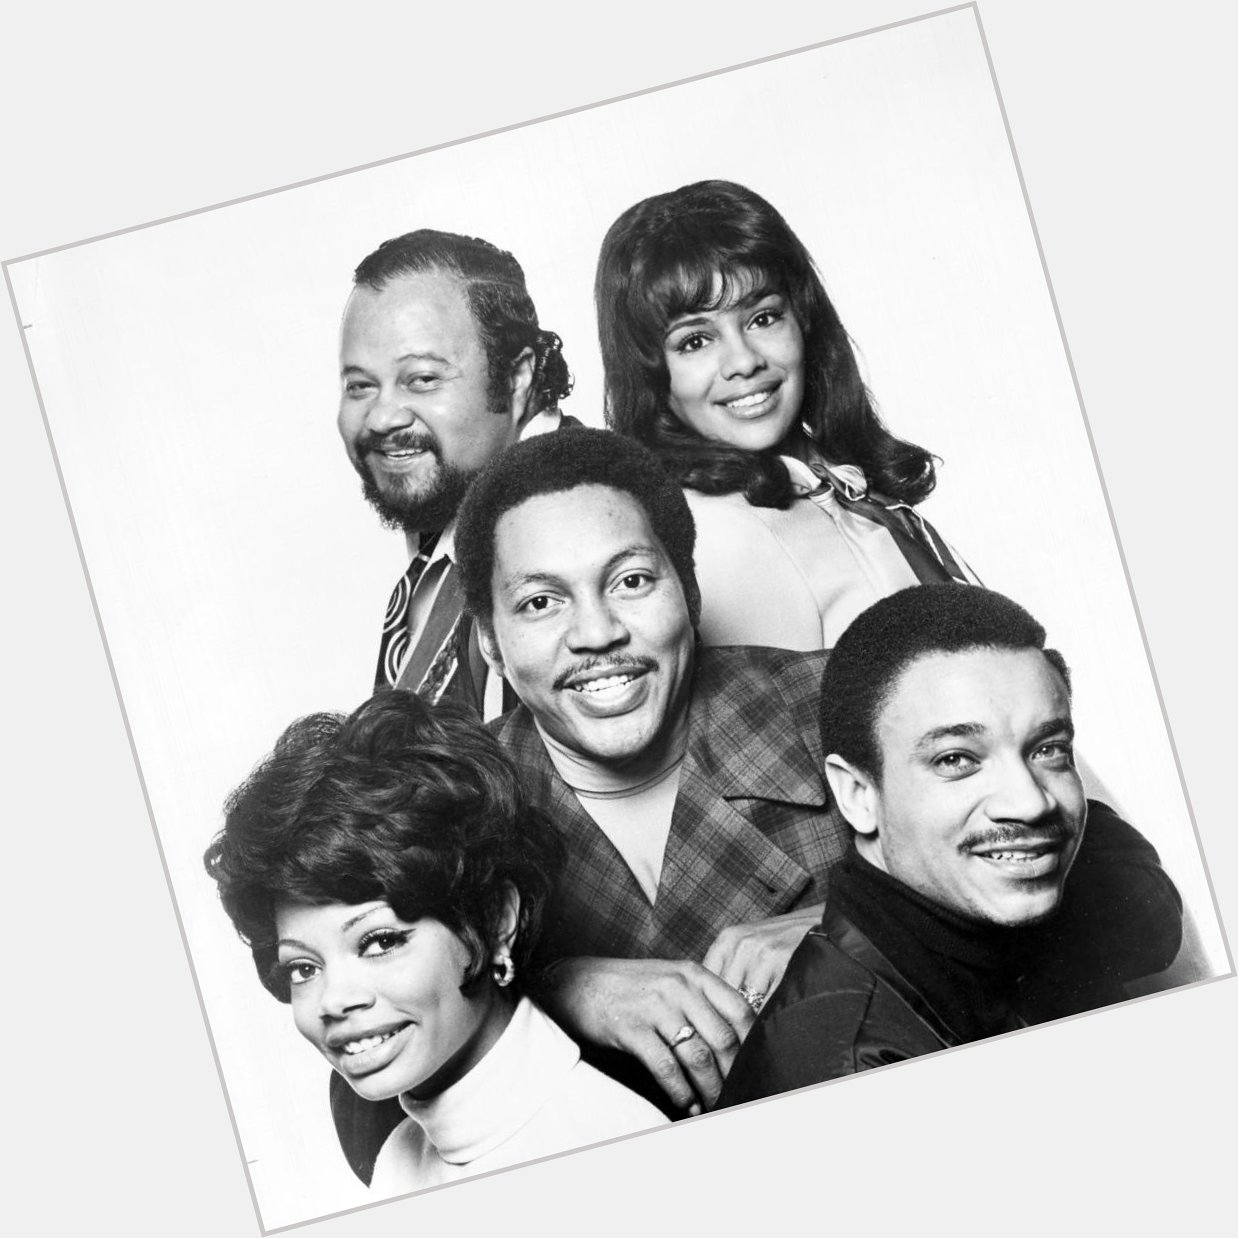 Happy birthday Marilyn McCoo (September 30, 1943) American singer, actress, TV presenter & vocalist of 5th Dimension 